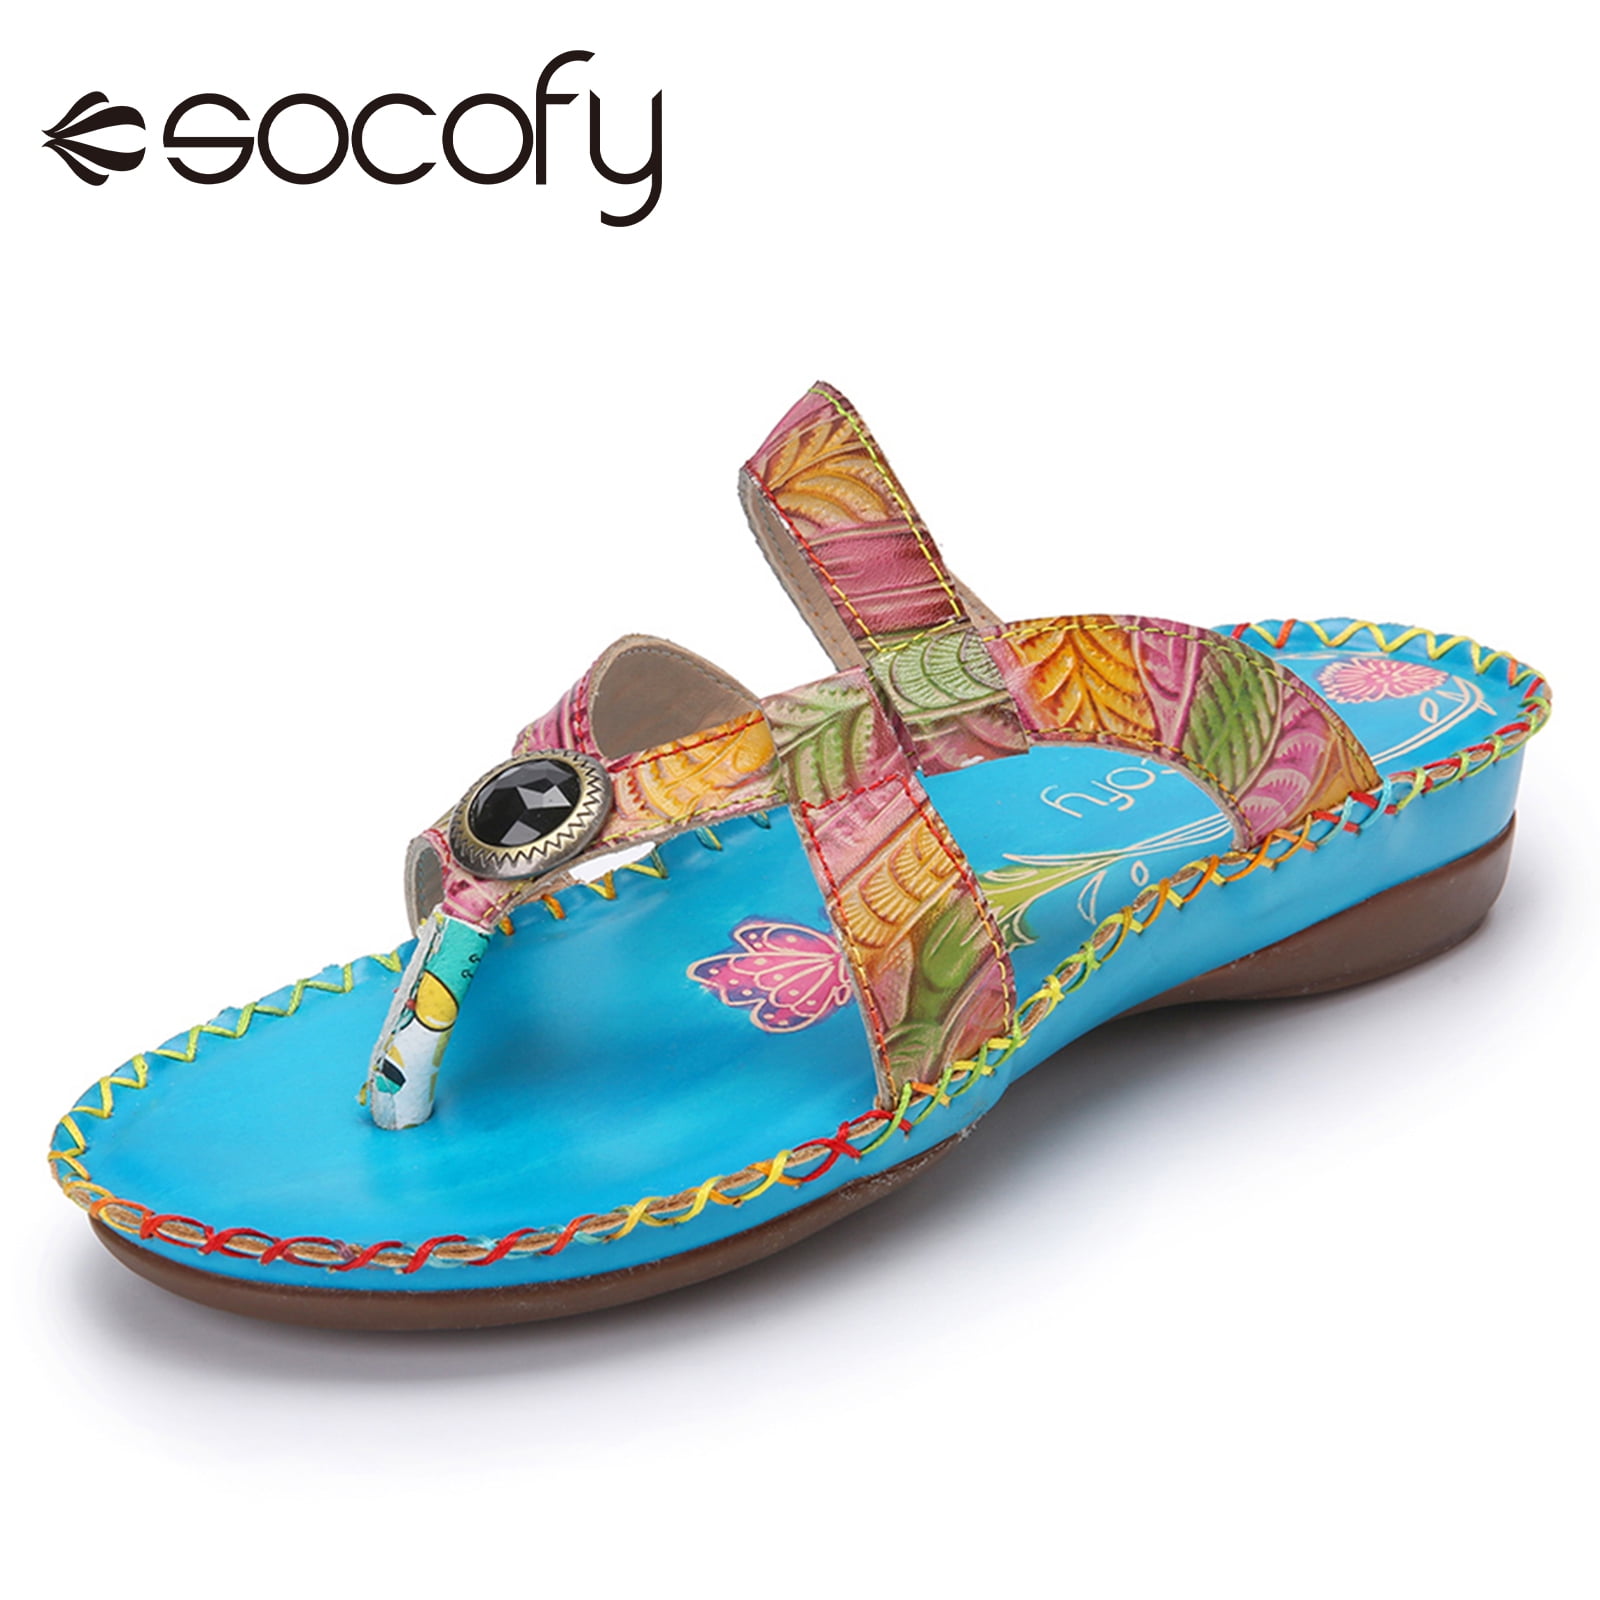 SOCOFY Women Genuine Leather Shoes Summer Printing Sandals Slippers Platform